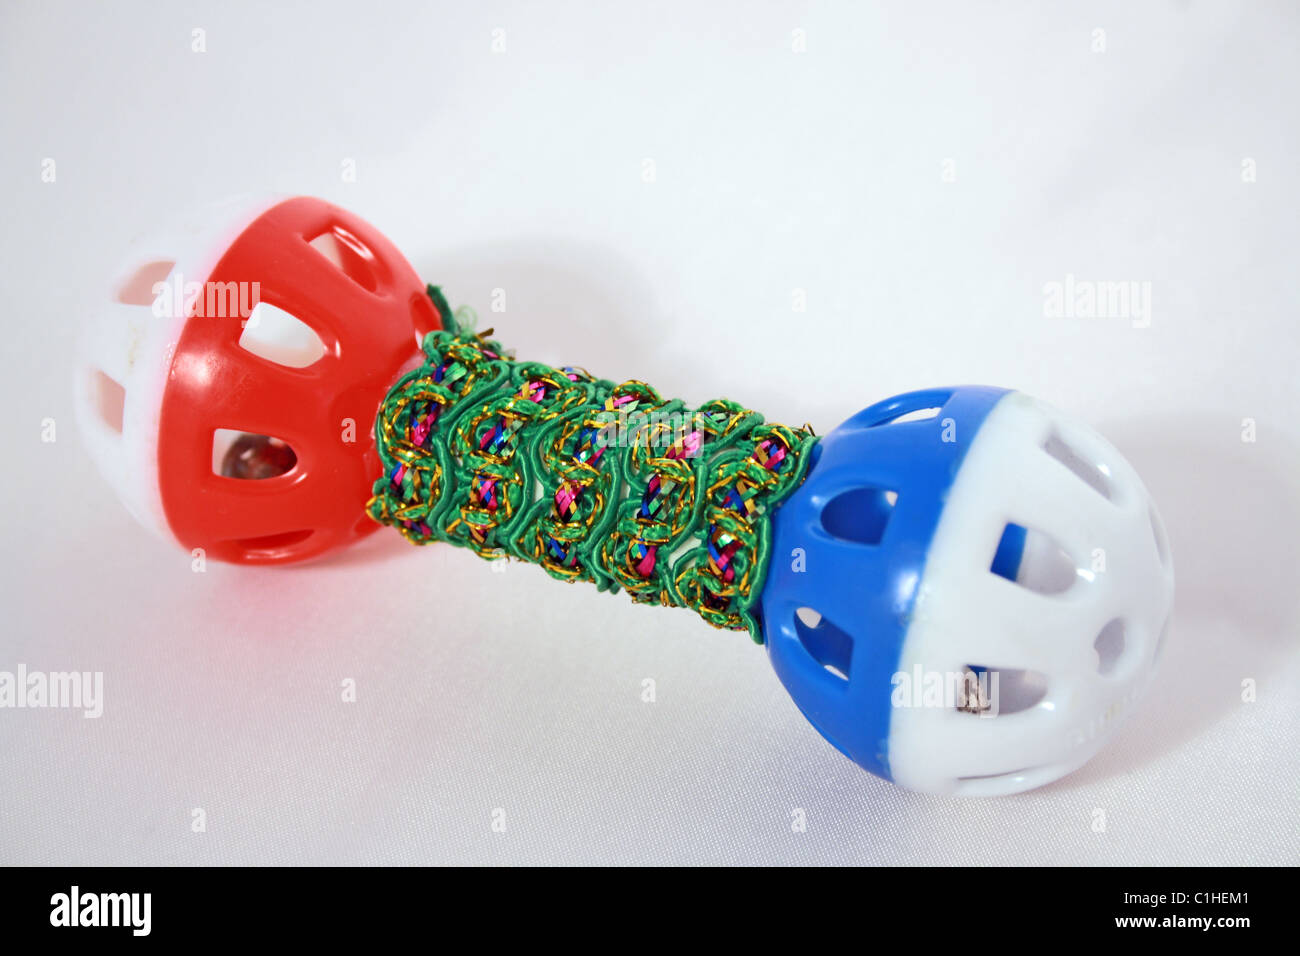 A cat toy with bells inside Stock Photo